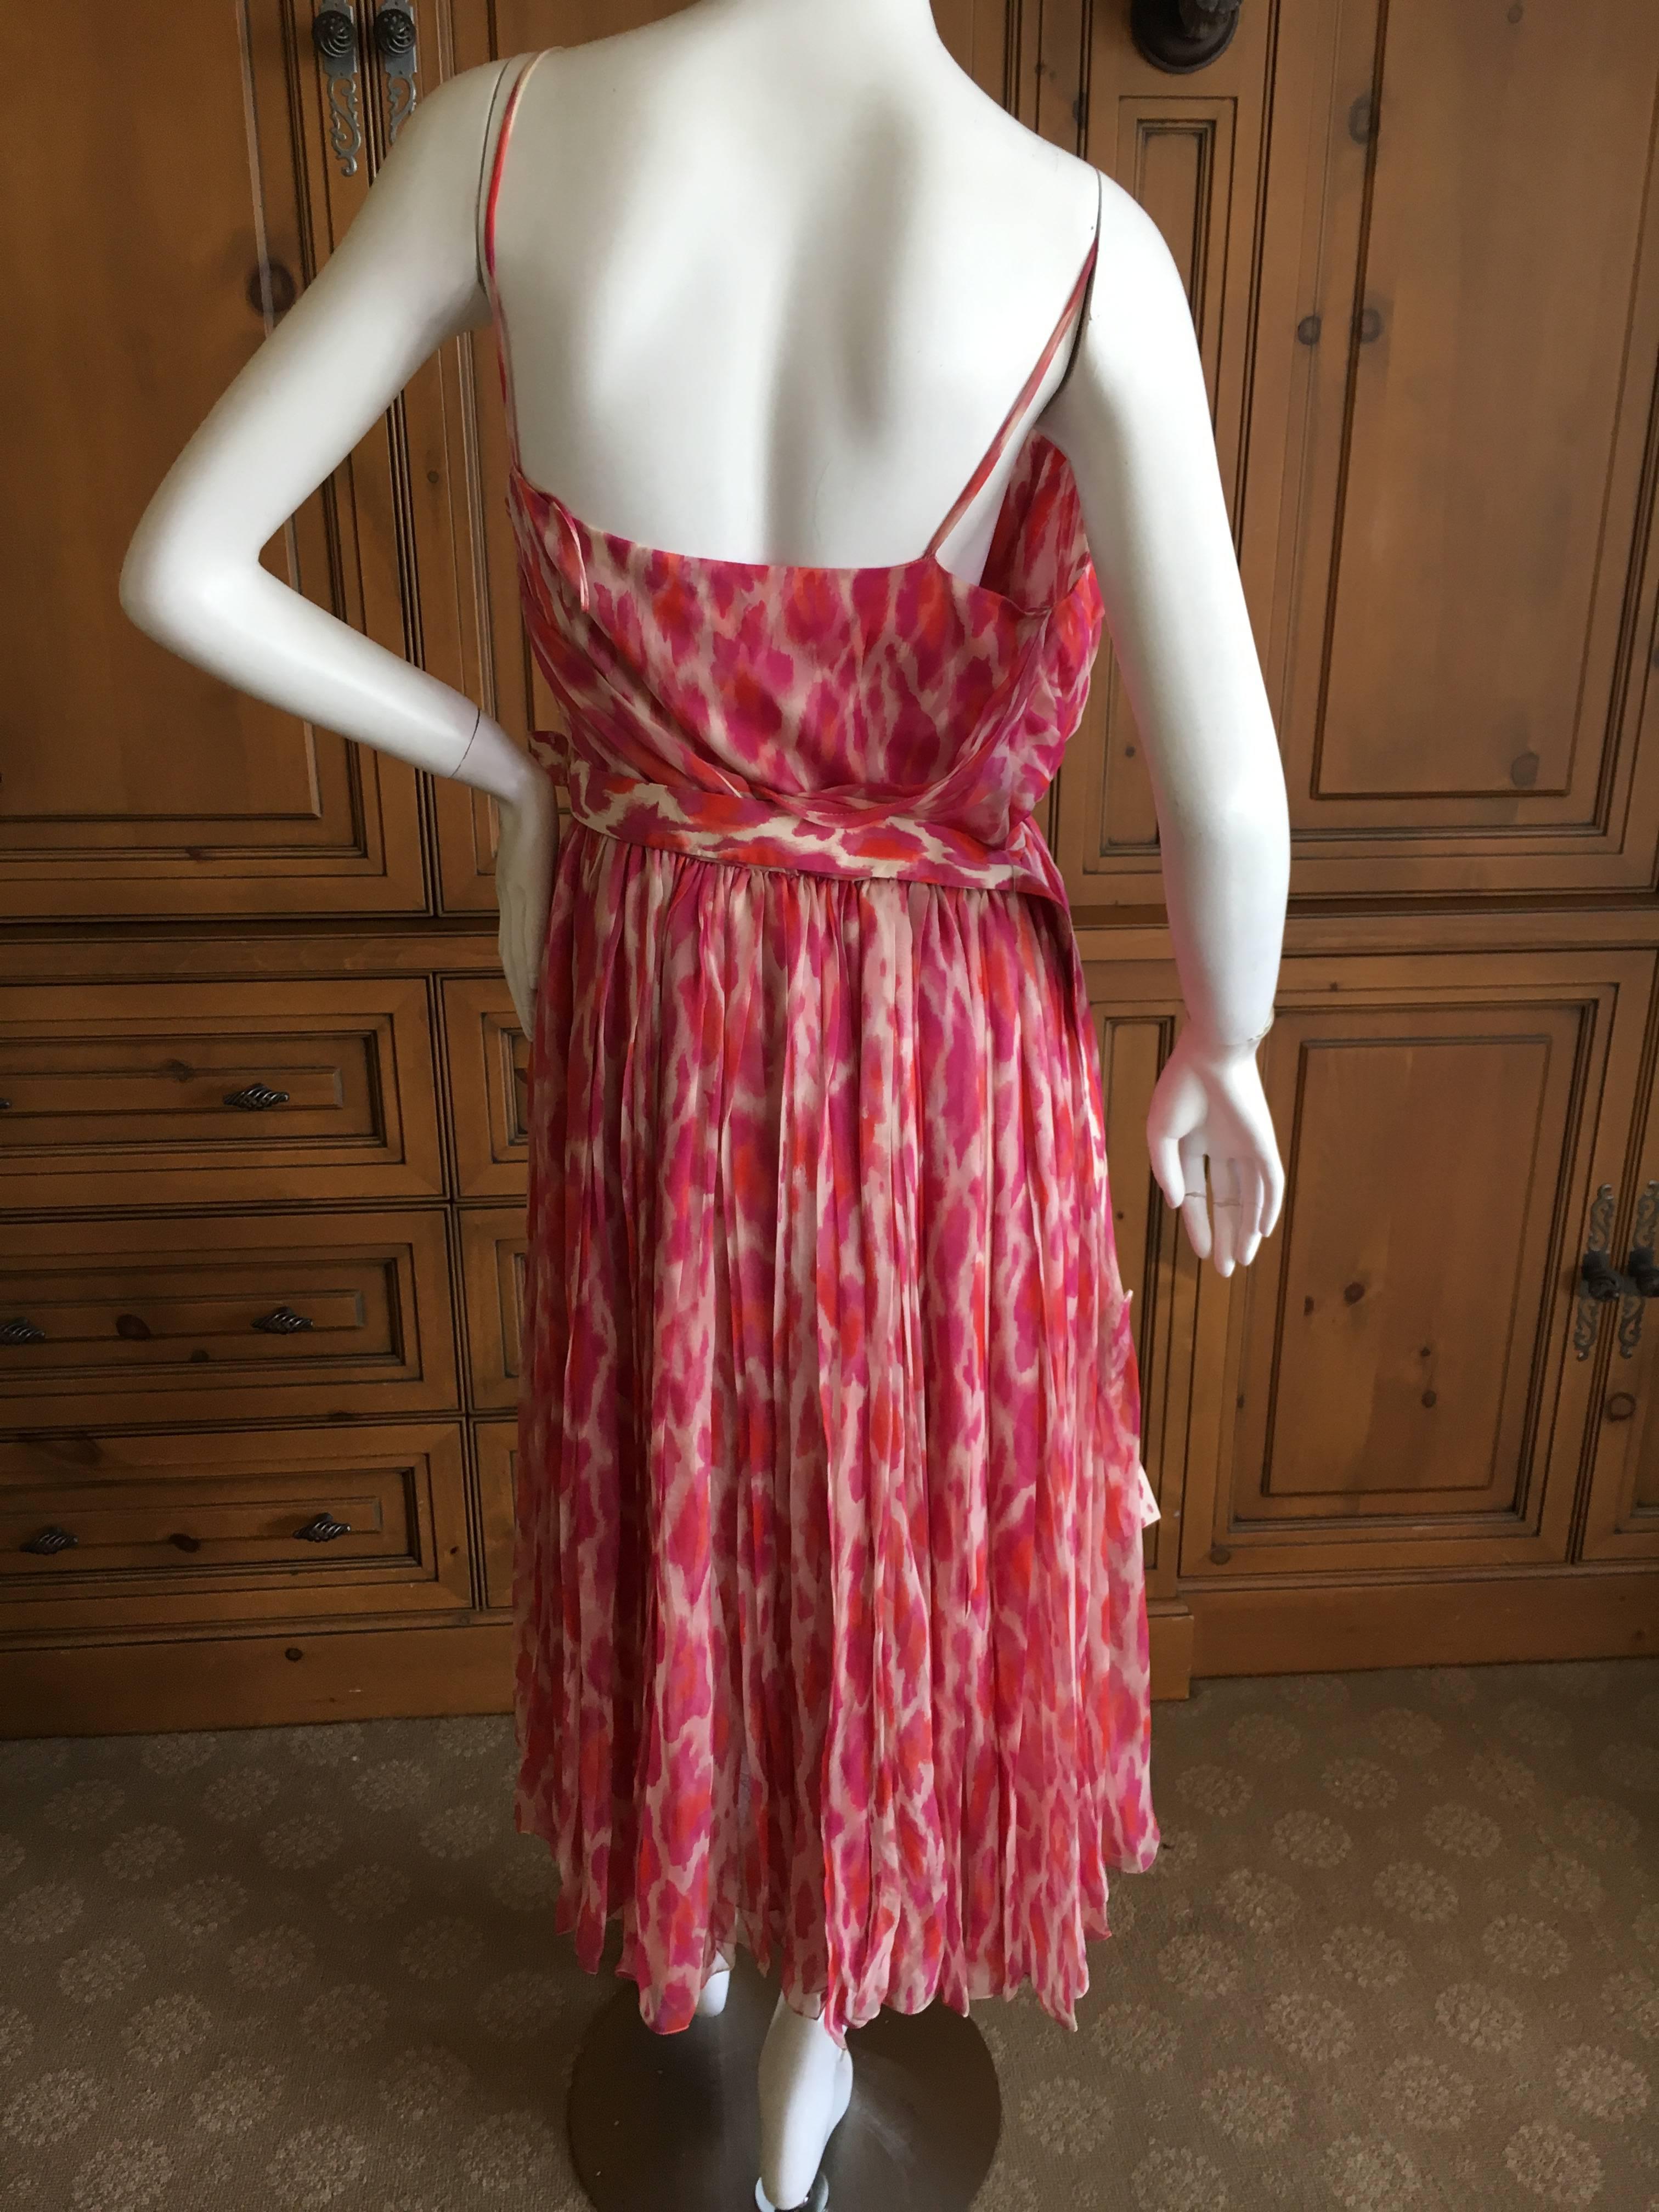 Christian Dior Rose Leopard Print Belted Dress by Galliano In Excellent Condition For Sale In Cloverdale, CA